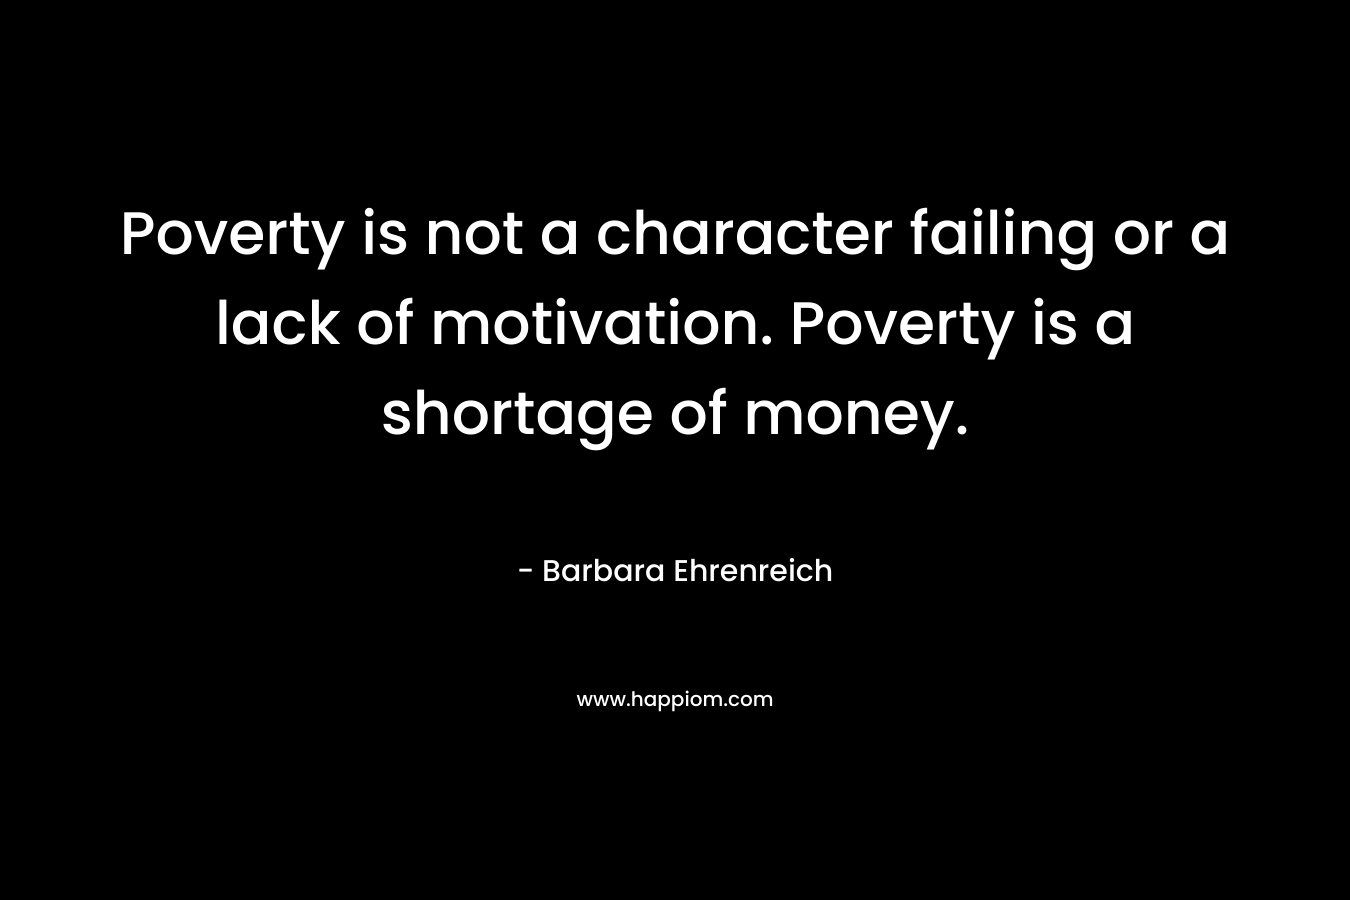 Poverty is not a character failing or a lack of motivation. Poverty is a shortage of money. – Barbara Ehrenreich